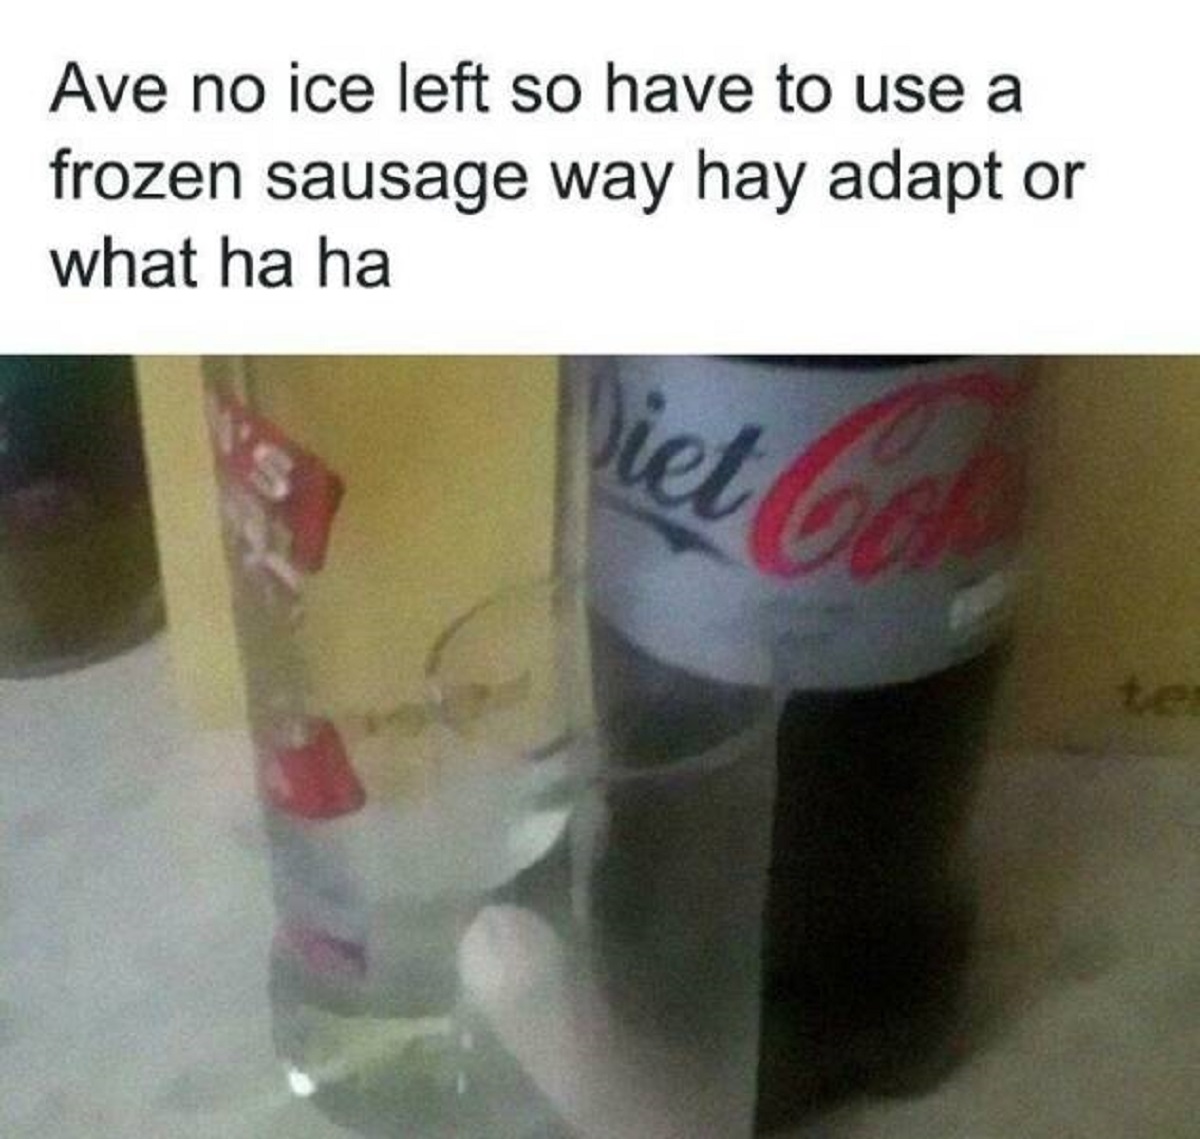 coca-cola - Ave no ice left so have to use a frozen sausage way hay adapt or what ha ha Diet Col te